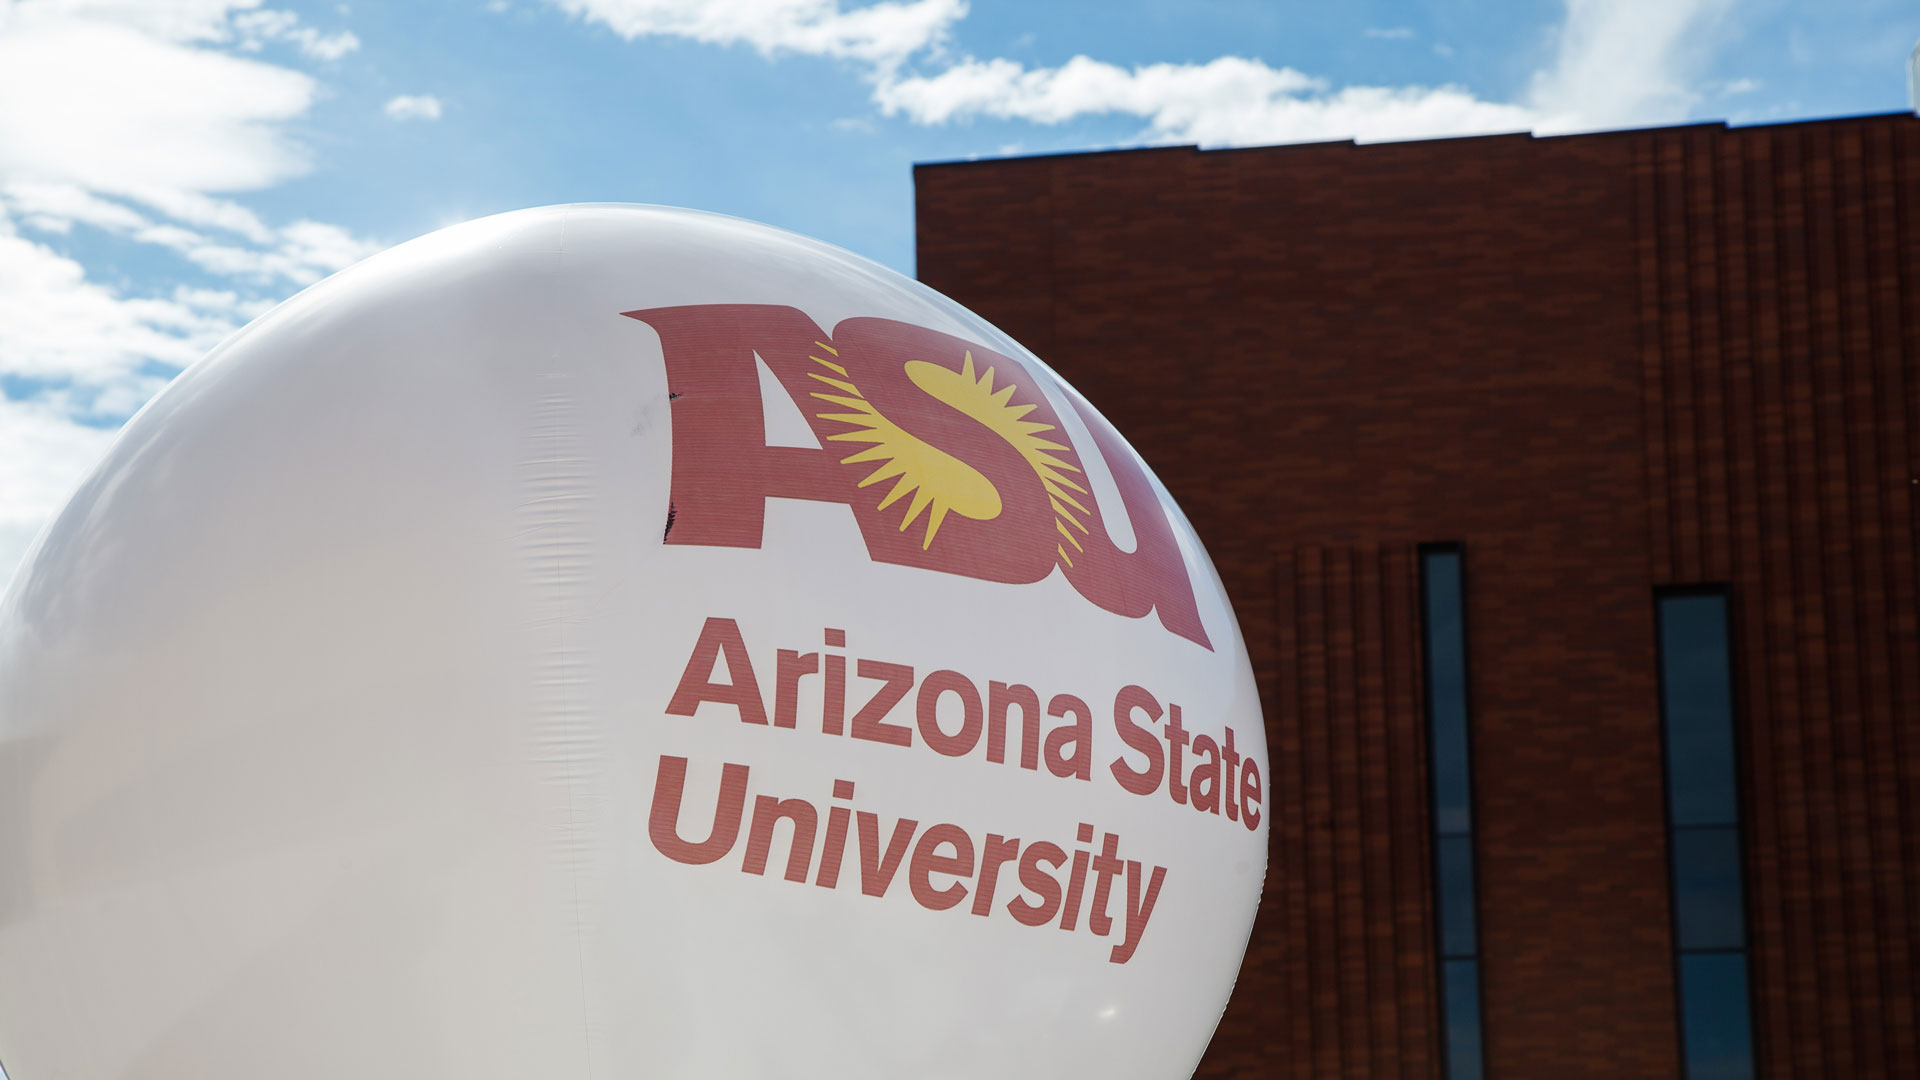 A large white balloon with Arizona State University printed on it, pictured in front of a building on the ASU Tempe campus.